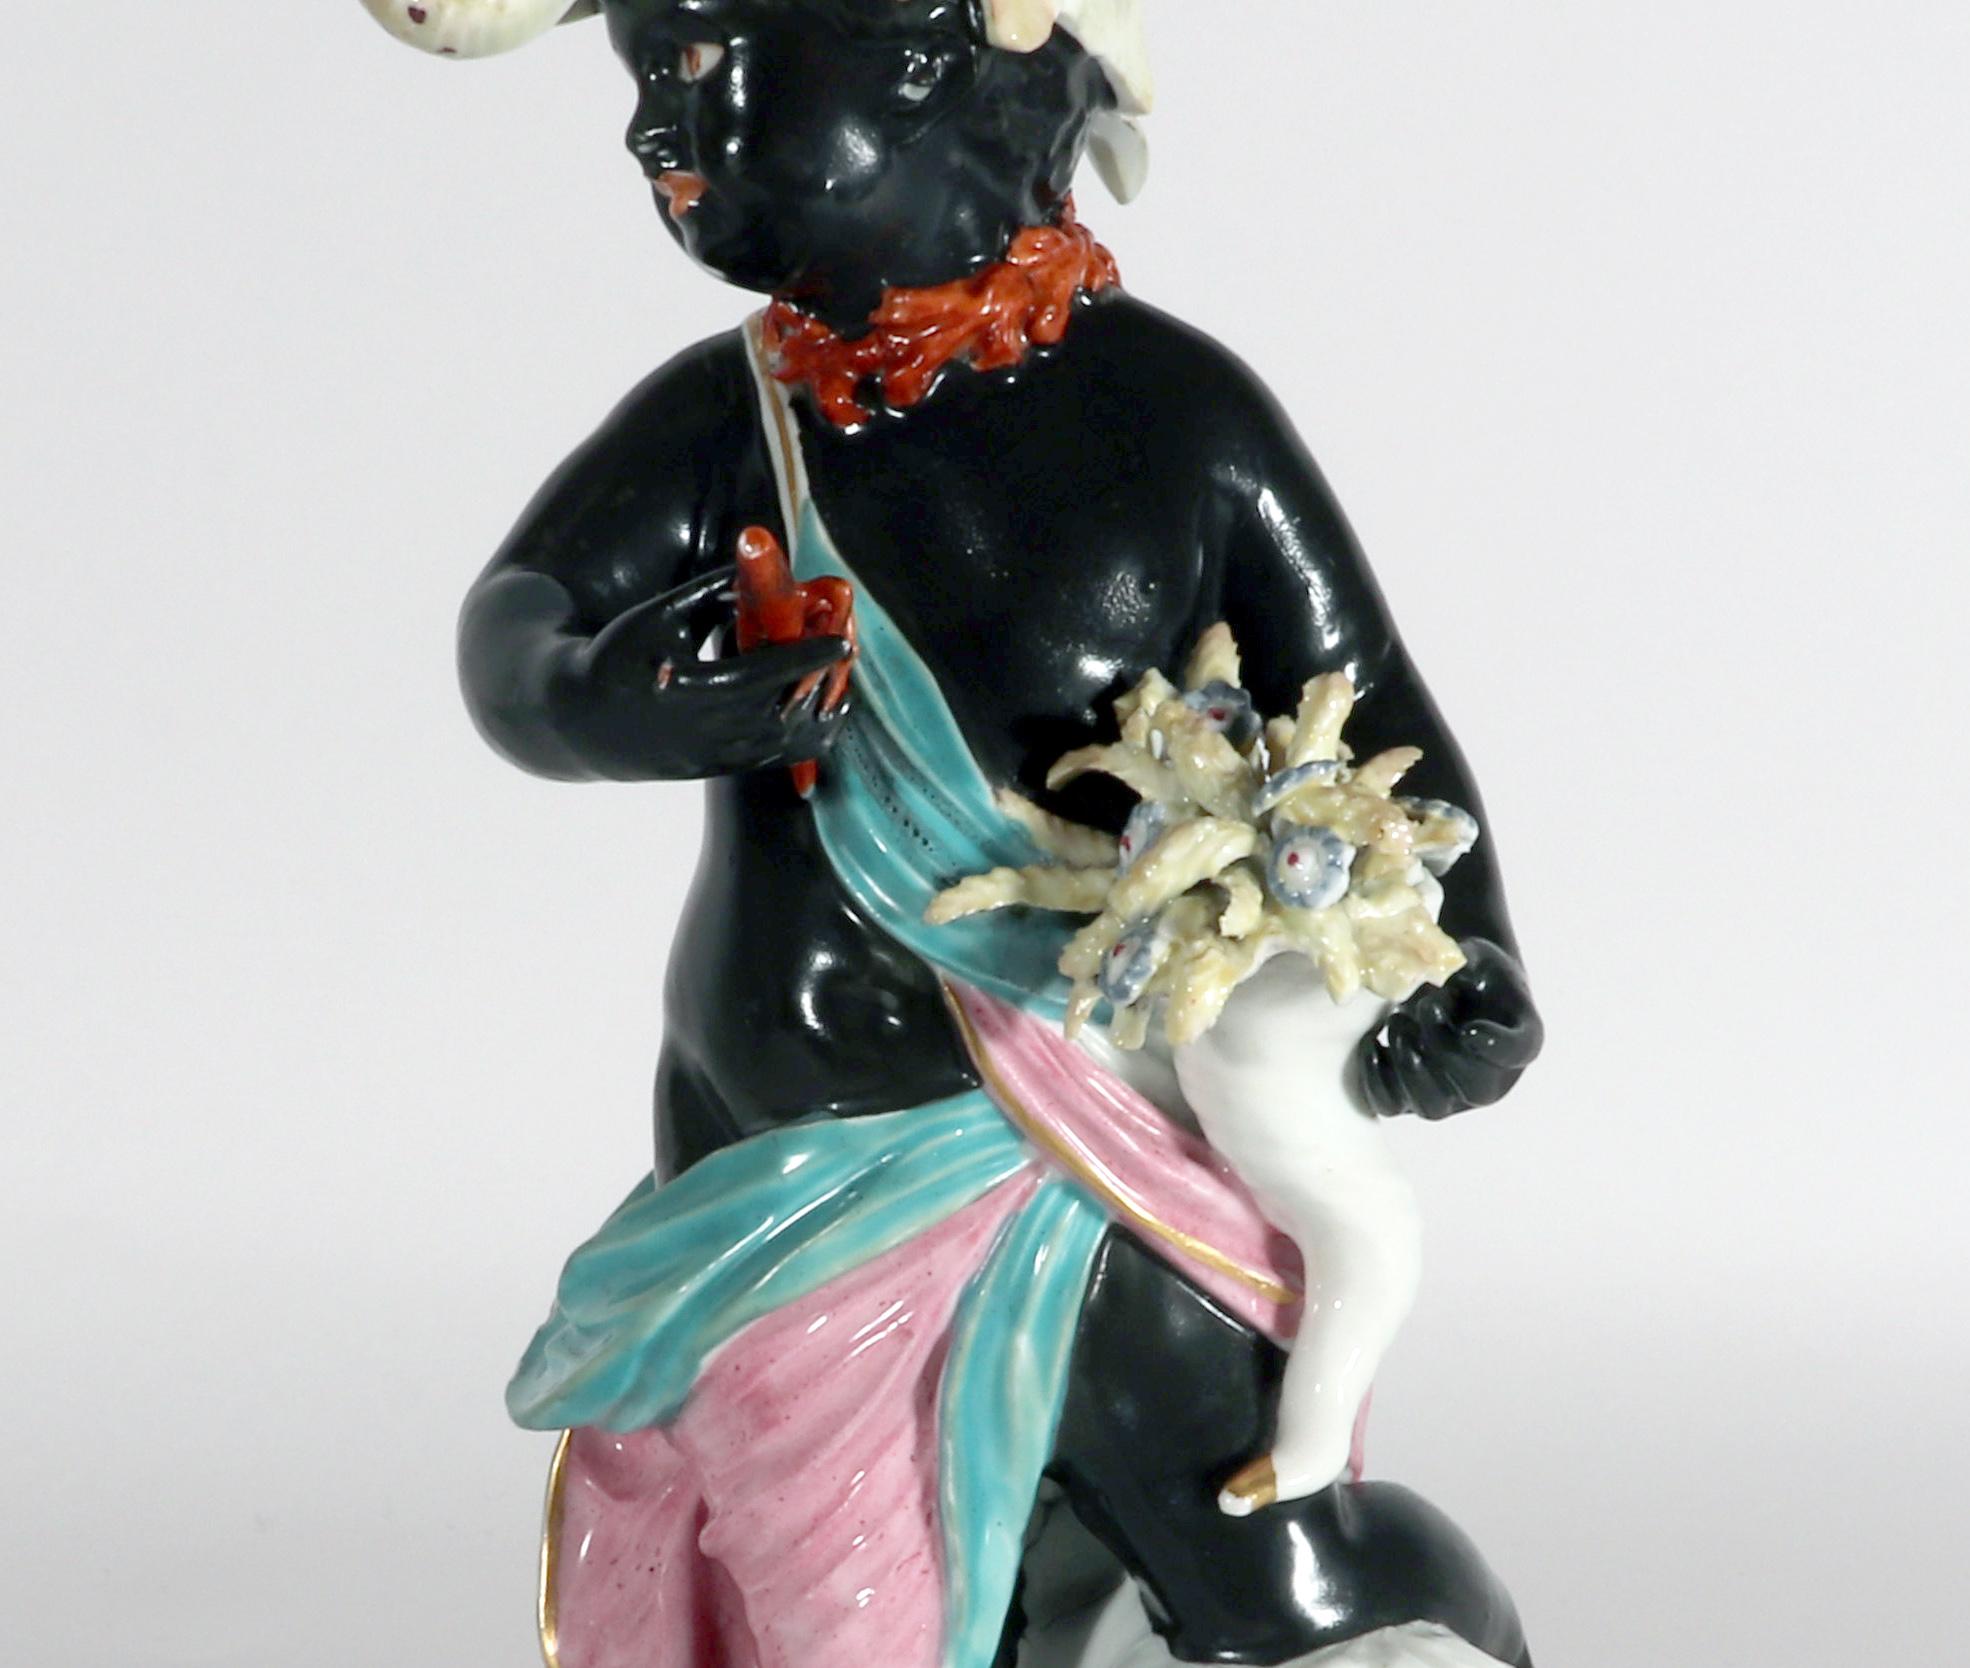 Large Derby Porcelain Figure of Africa,
From a series known as the 